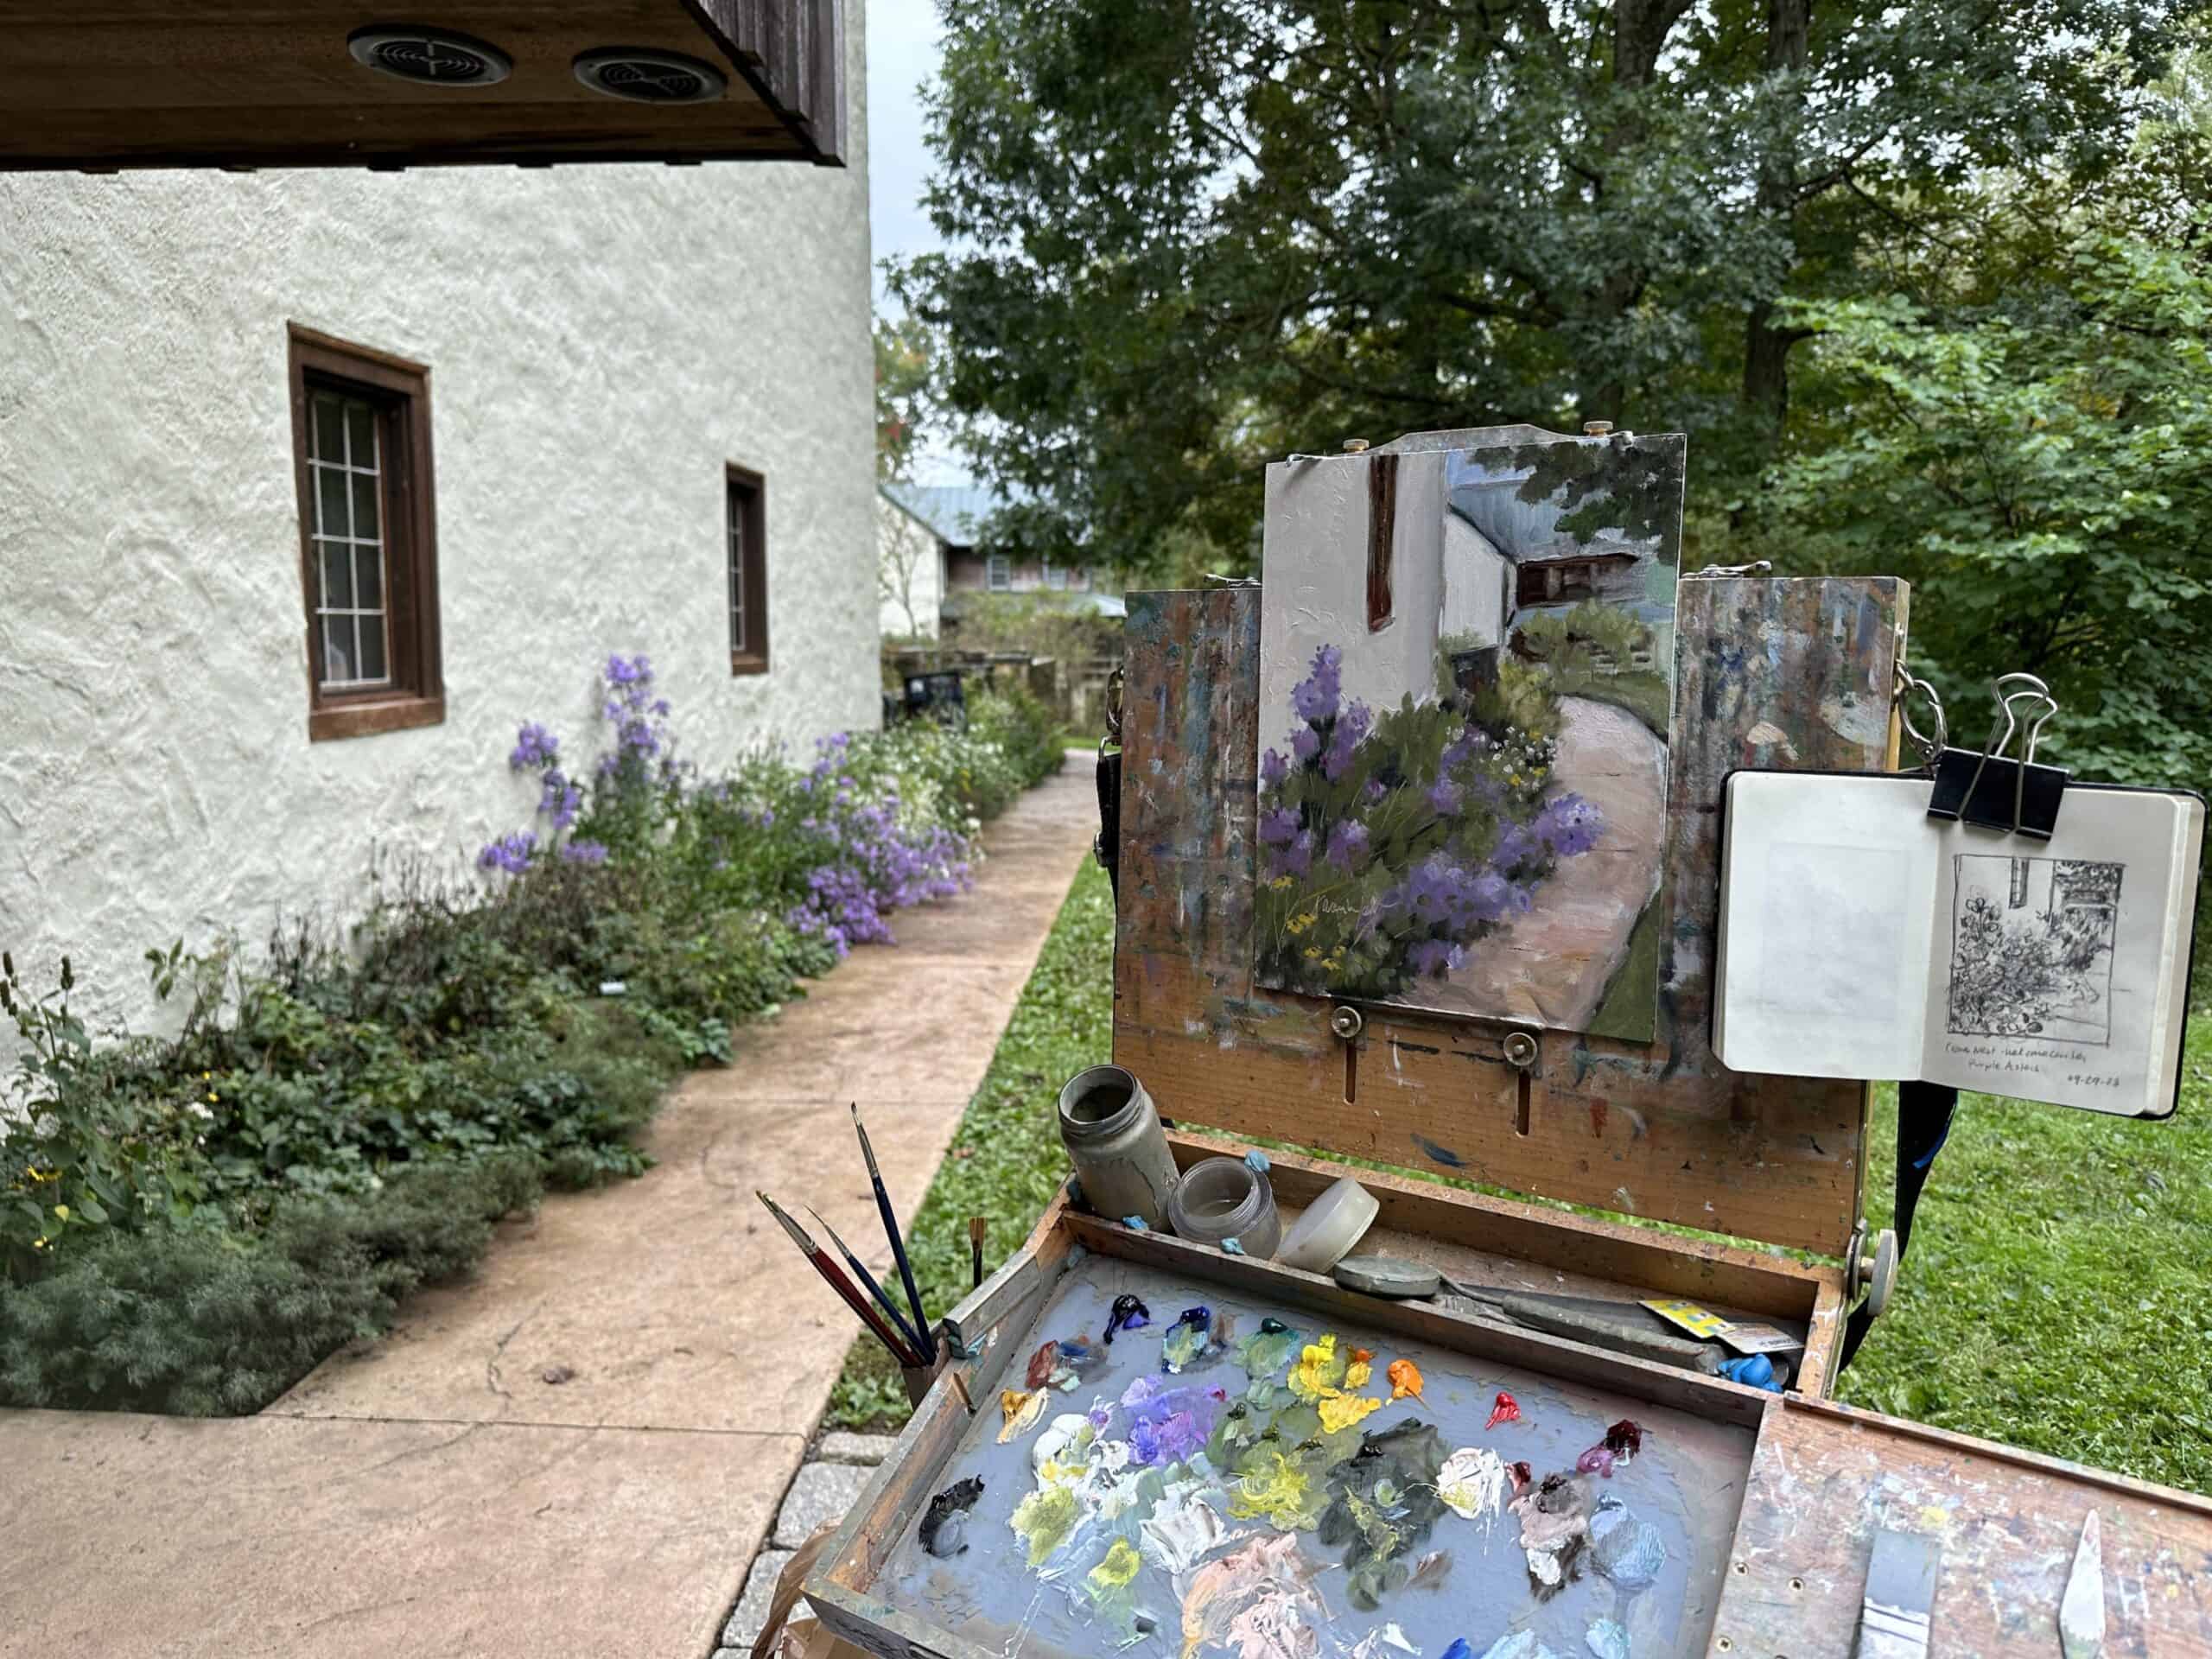 Plein air painting of a scene at the visitor center at Crow's Nest Preserve.